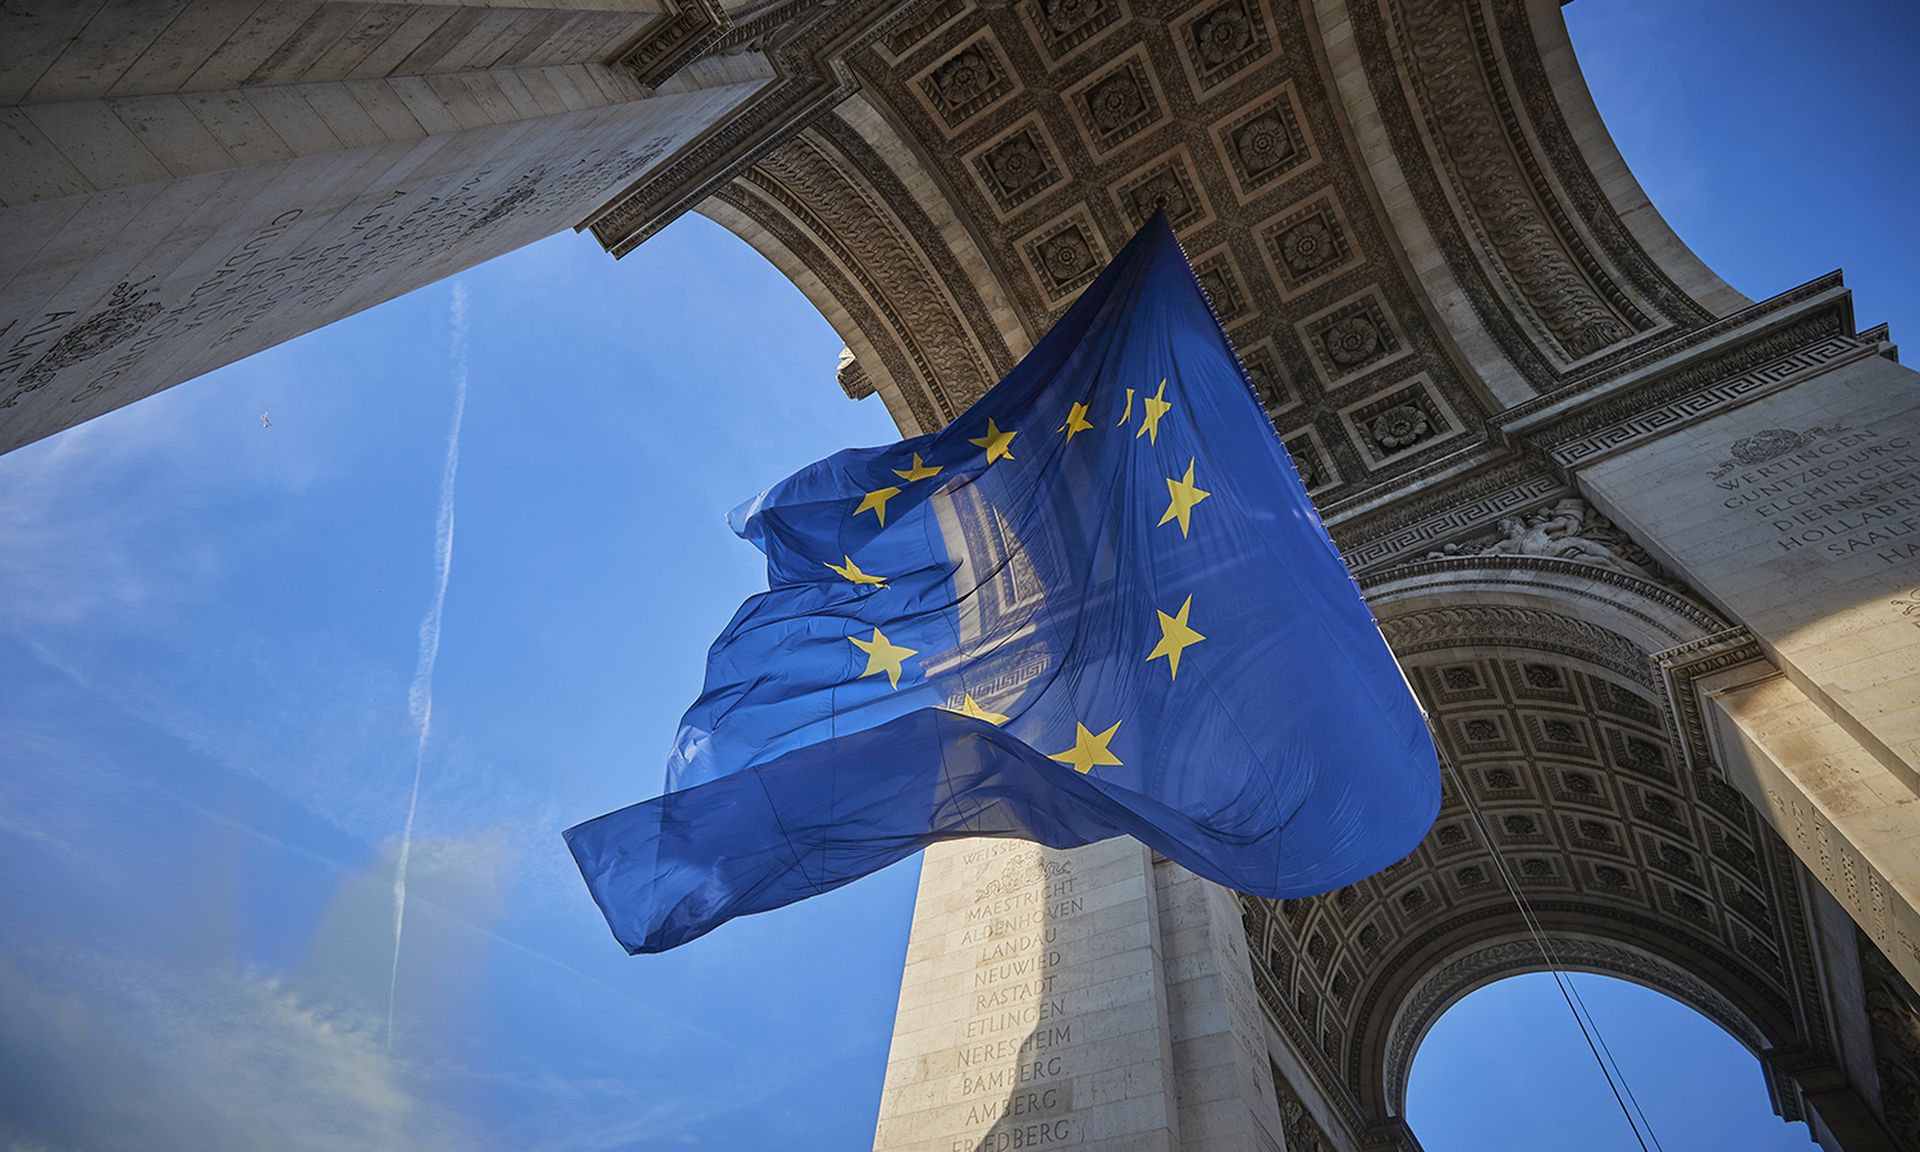 A giant flag of the European Union flies at the Arc de Triomphe on the 20th anniversary of the introduction of the euro on Jan. 1, 2022, in Paris. (Photo by Kiran Ridley/Getty Images)